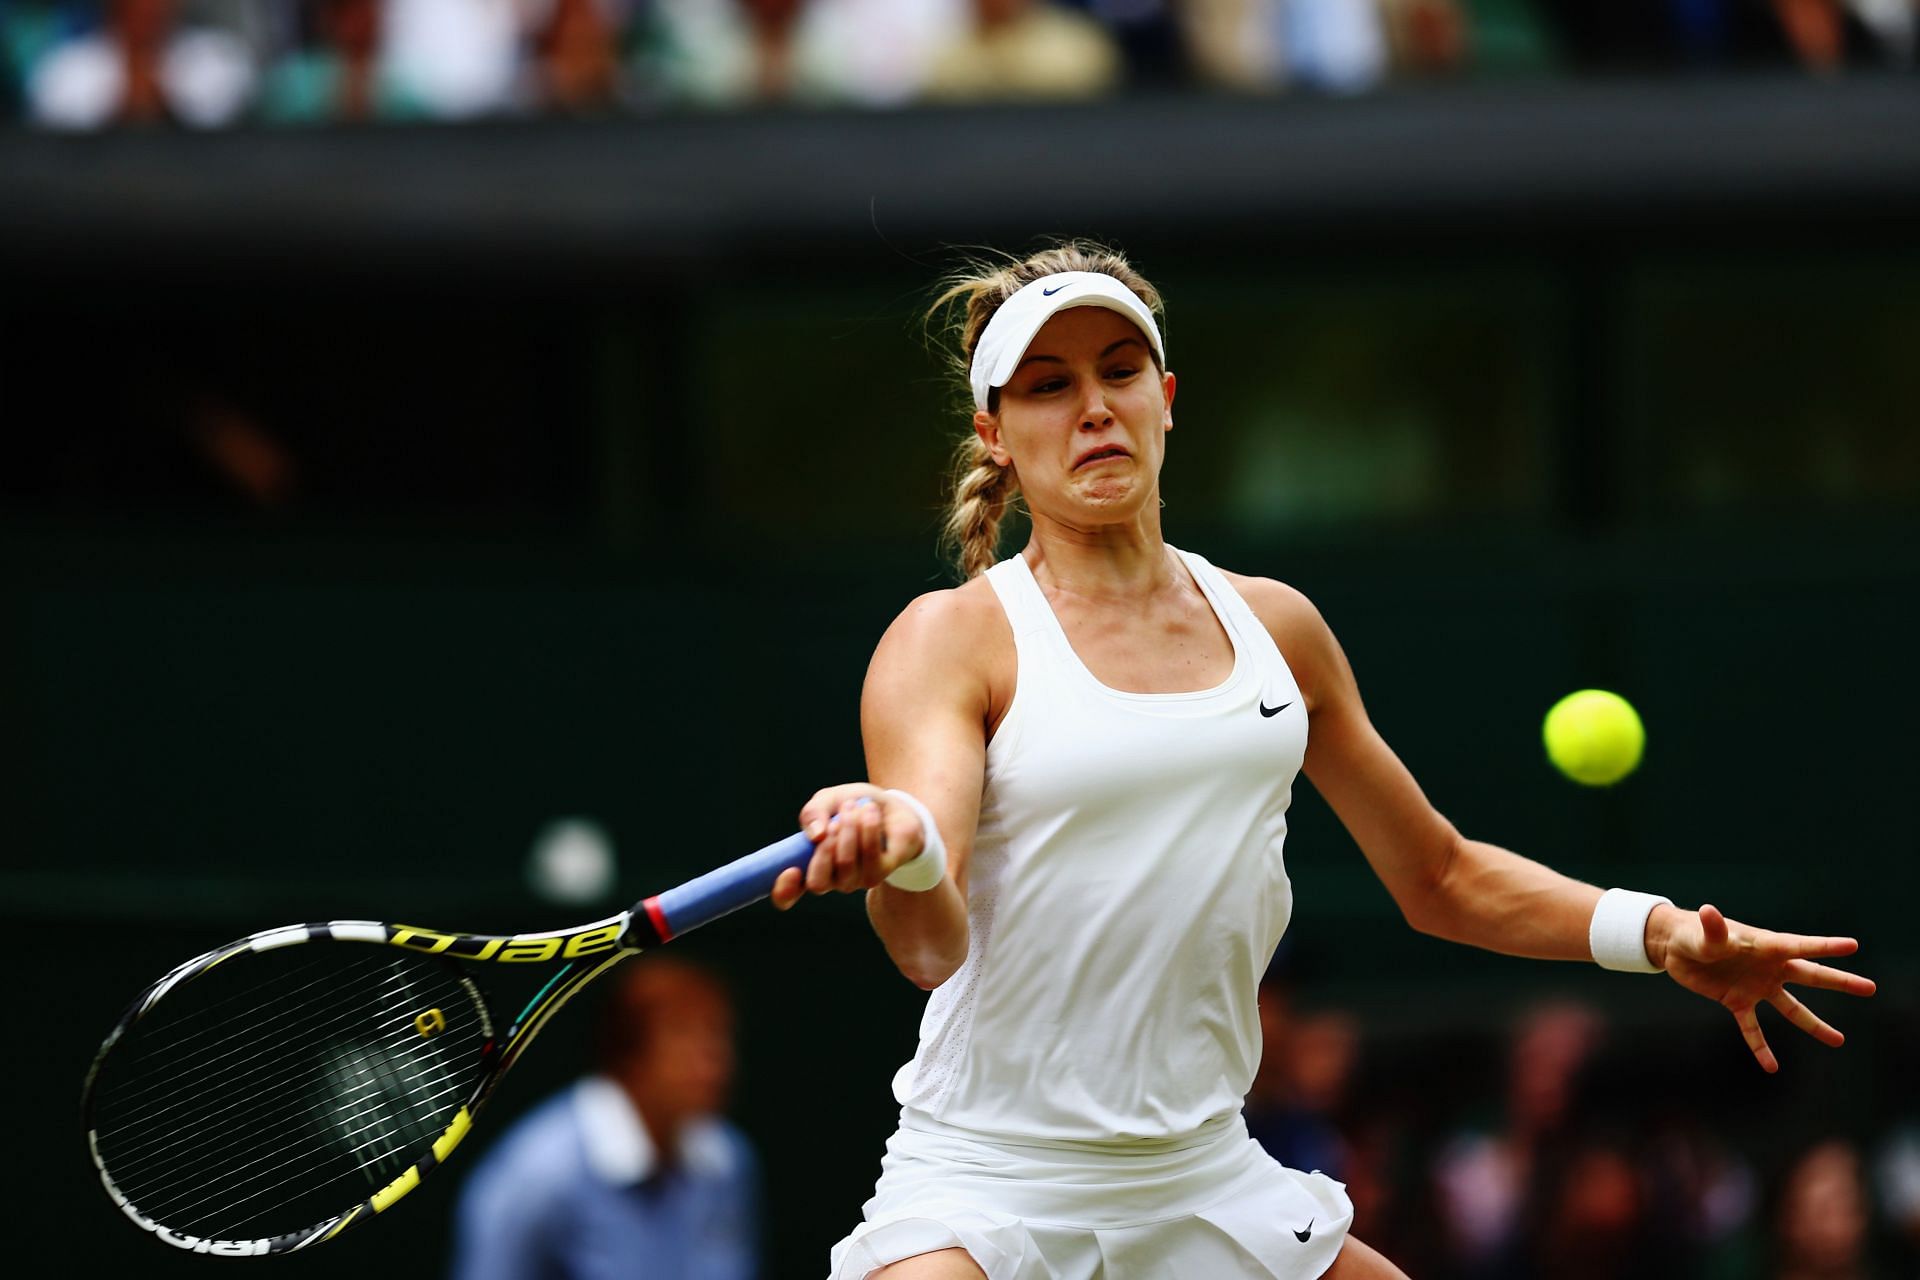 Eugenie Bouchard during the Ladies&#039; Singles final match against Petra Kvitova at the 2014 Wimbledon Championships at the All England Lawn Tennis and Croquet Club on July 5, 2014 in London, England - Getty Images